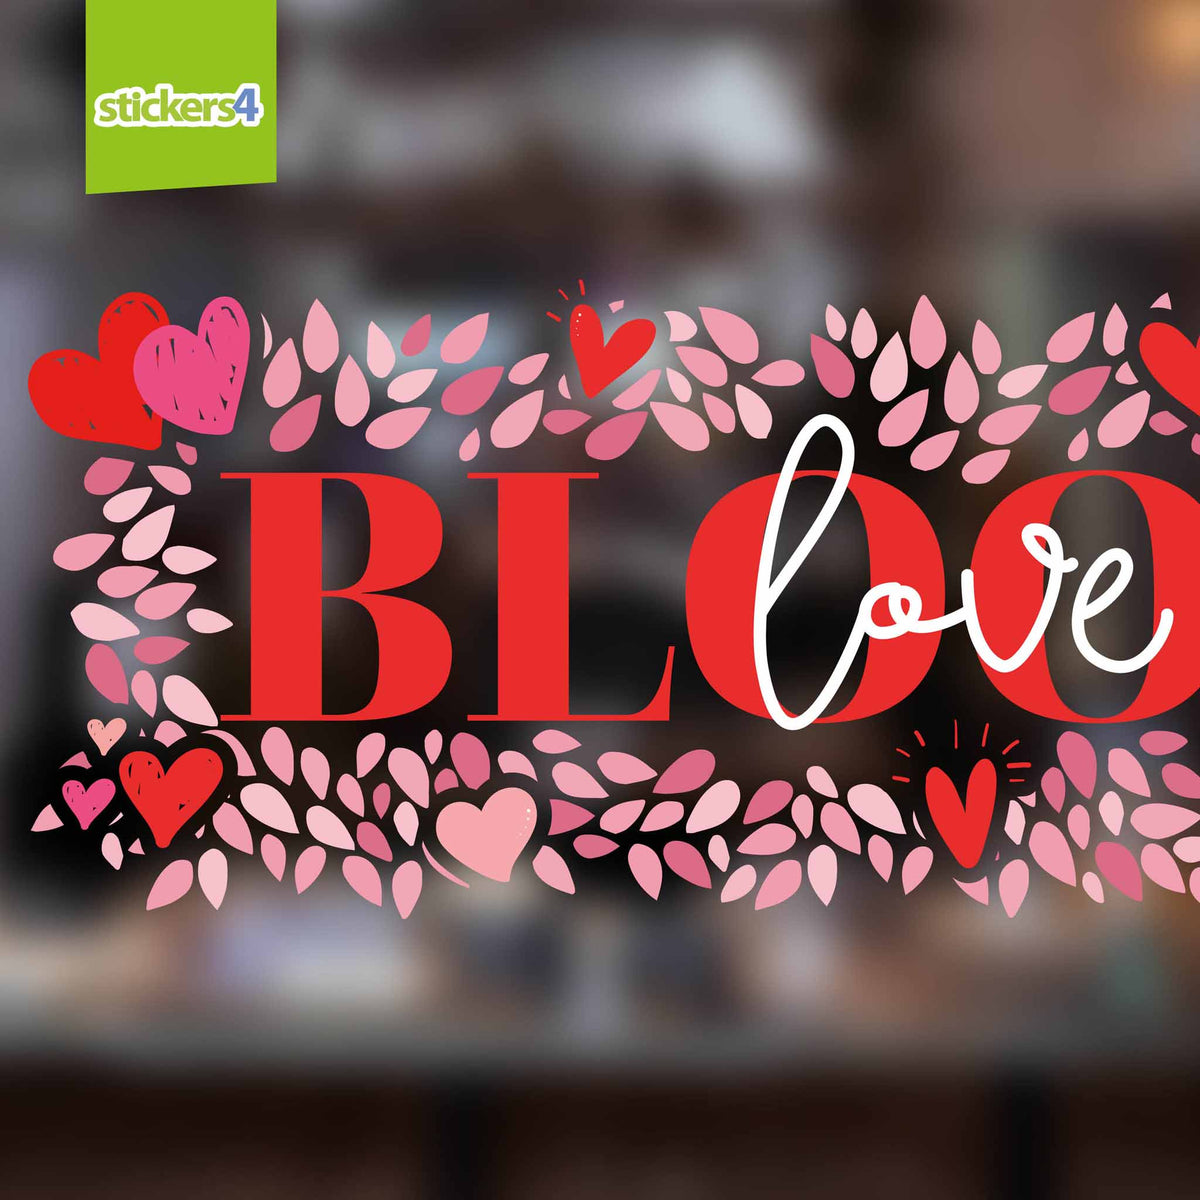 Blooming Love You - Valentine&#39;s Day Window Cling